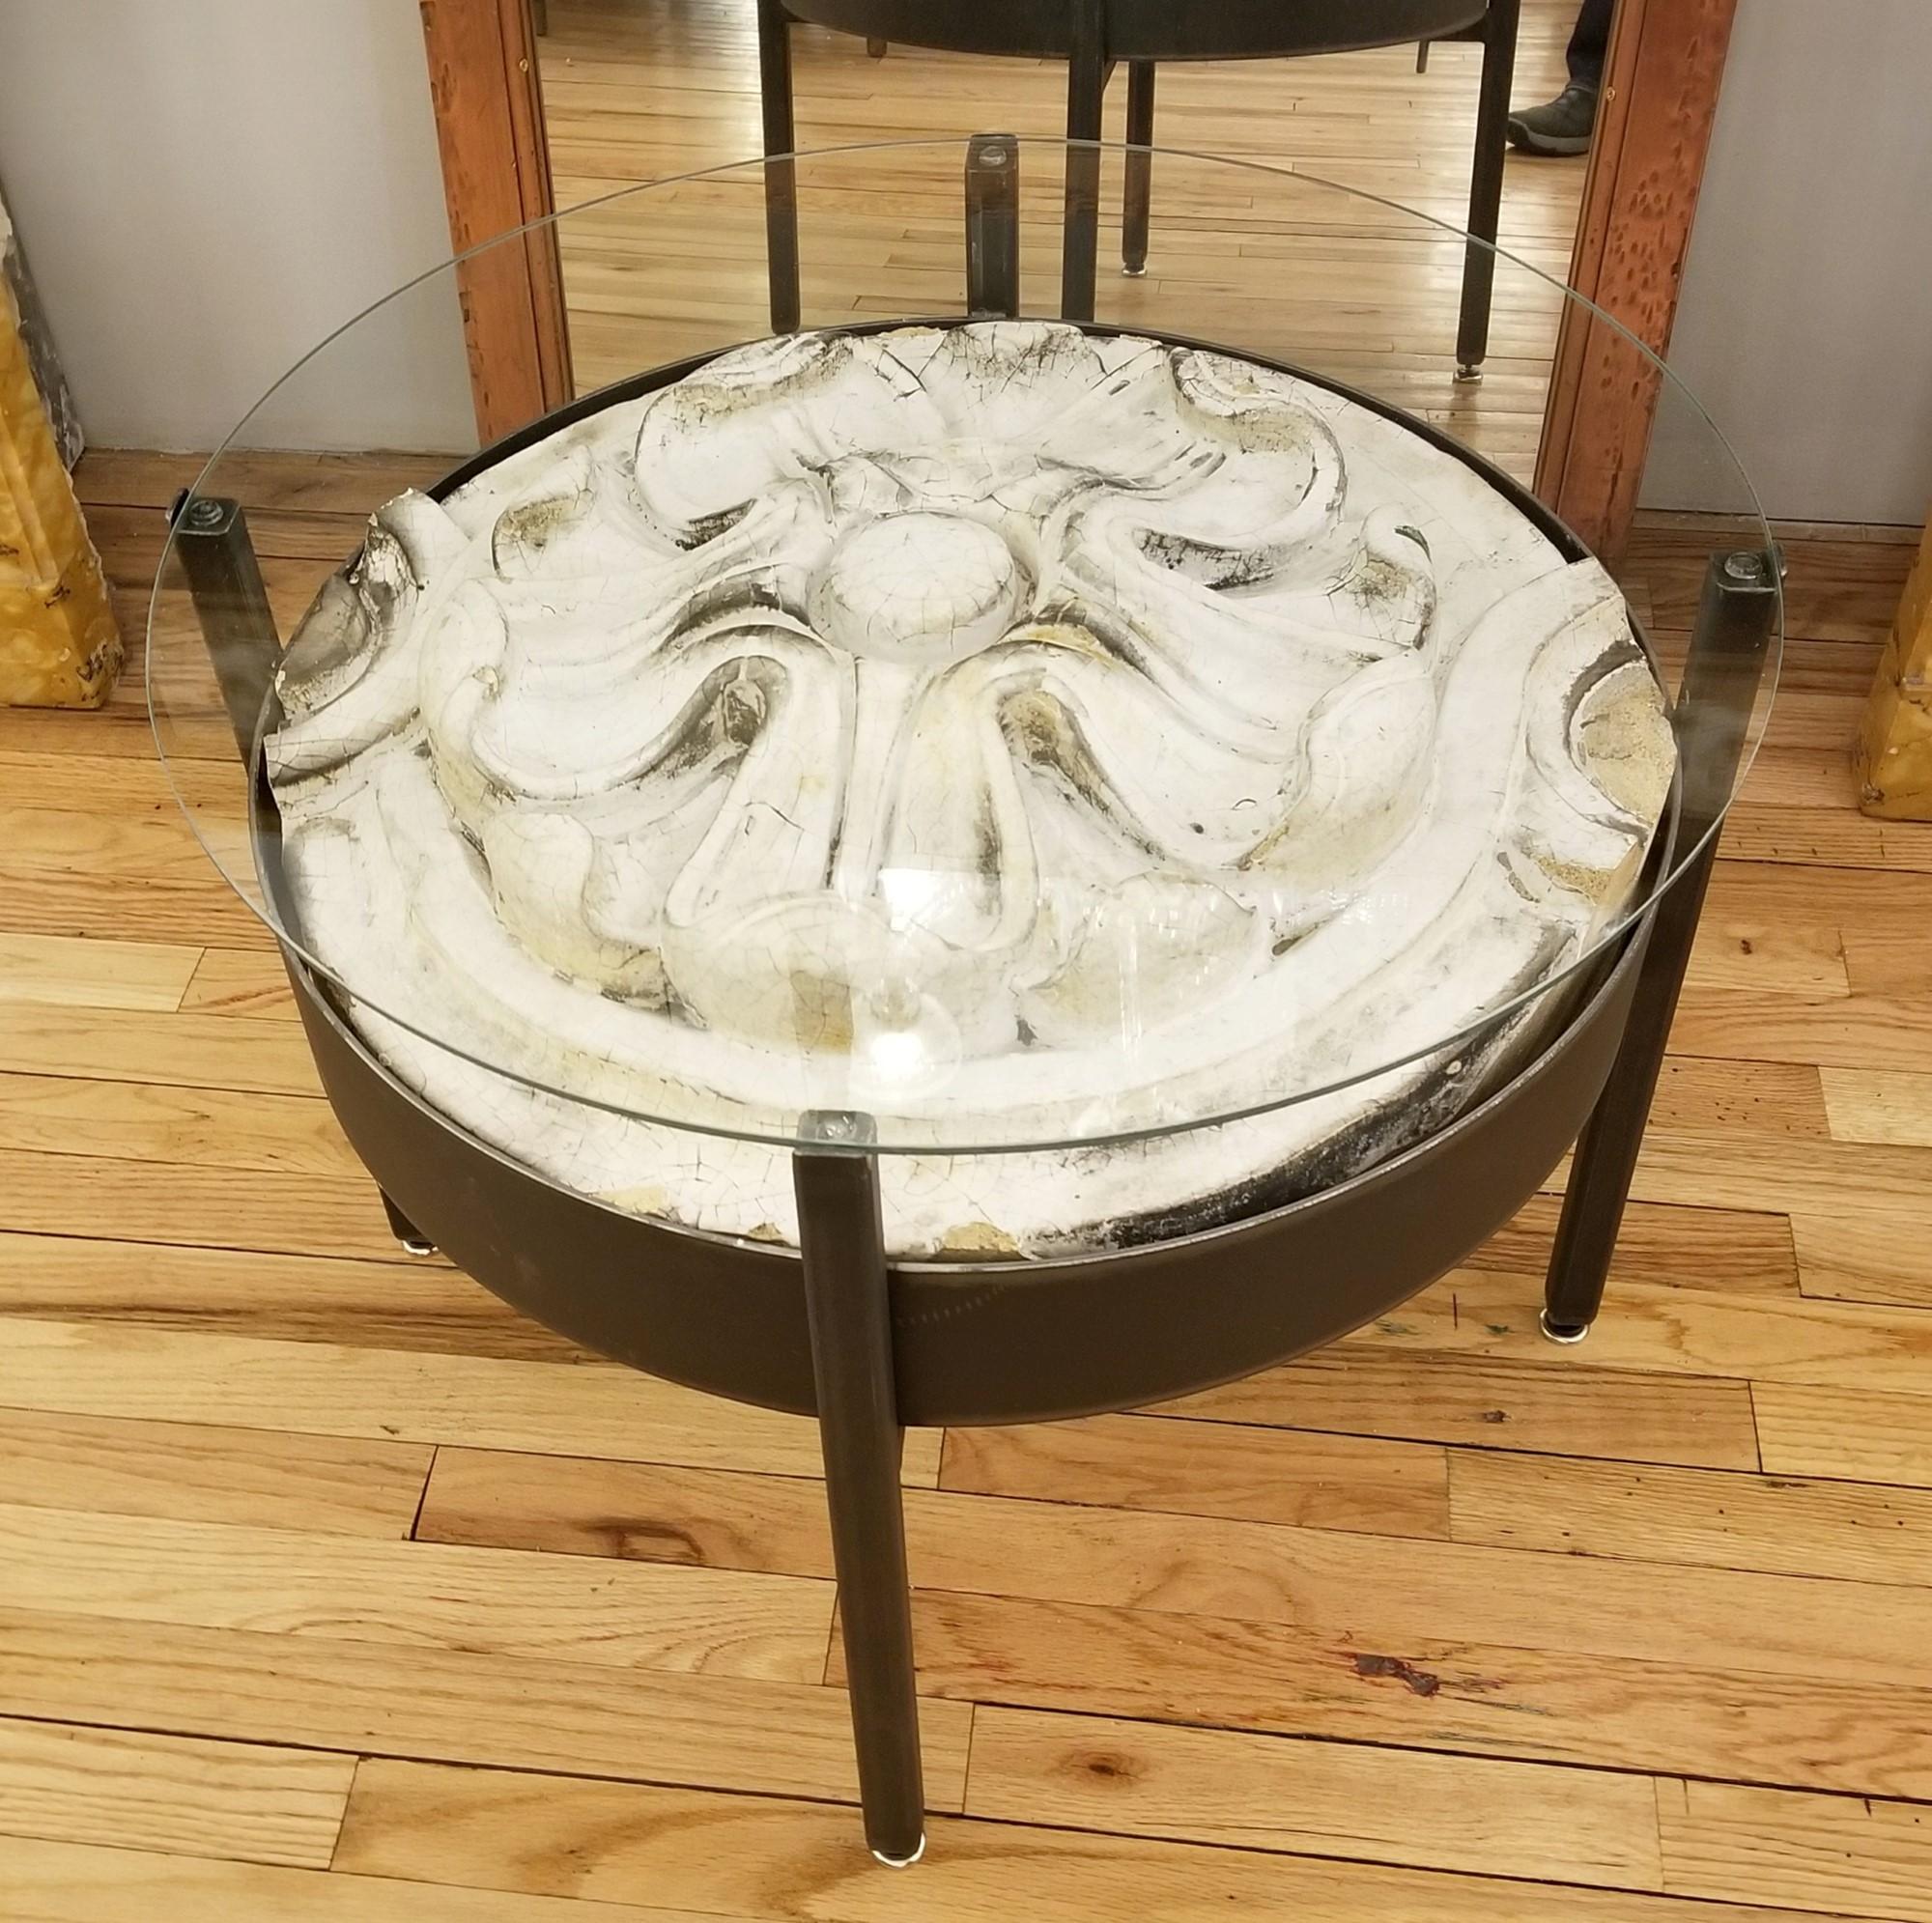 Recovered from a NYC building, this architectural glazed terra cotta flower piece has been made into a round side table. The iron table base is finished with a quarter inch thick glass on top. Please note, this item is located in one of our NYC